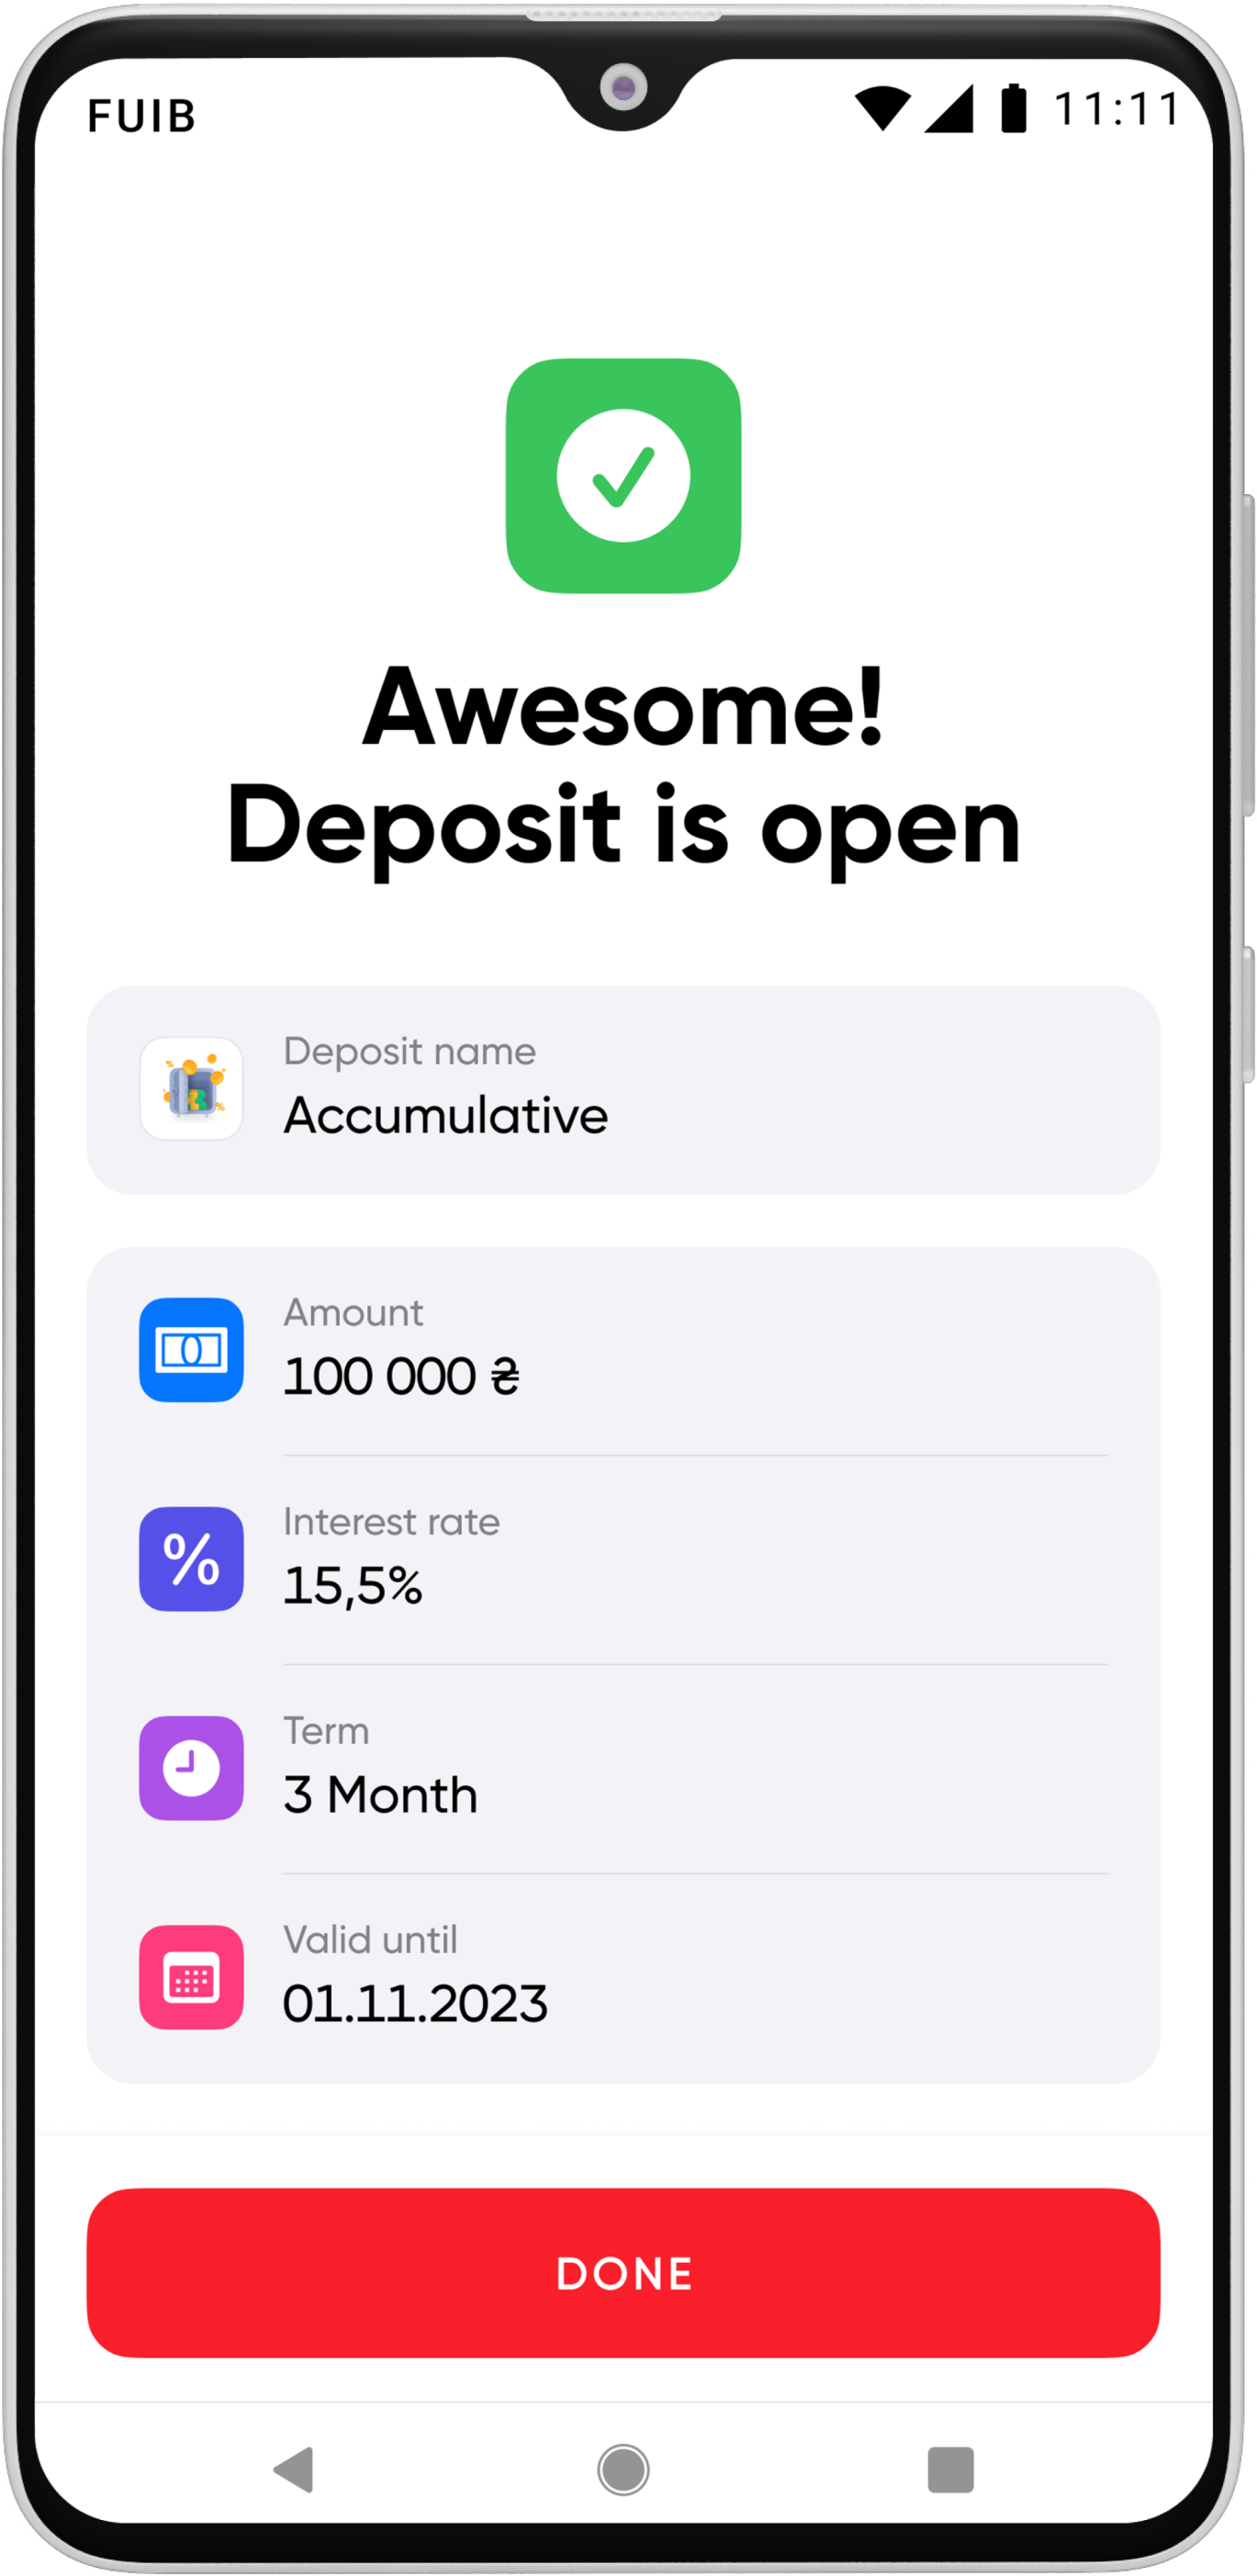 After opening a deposit, you will see a message about the successful opening 